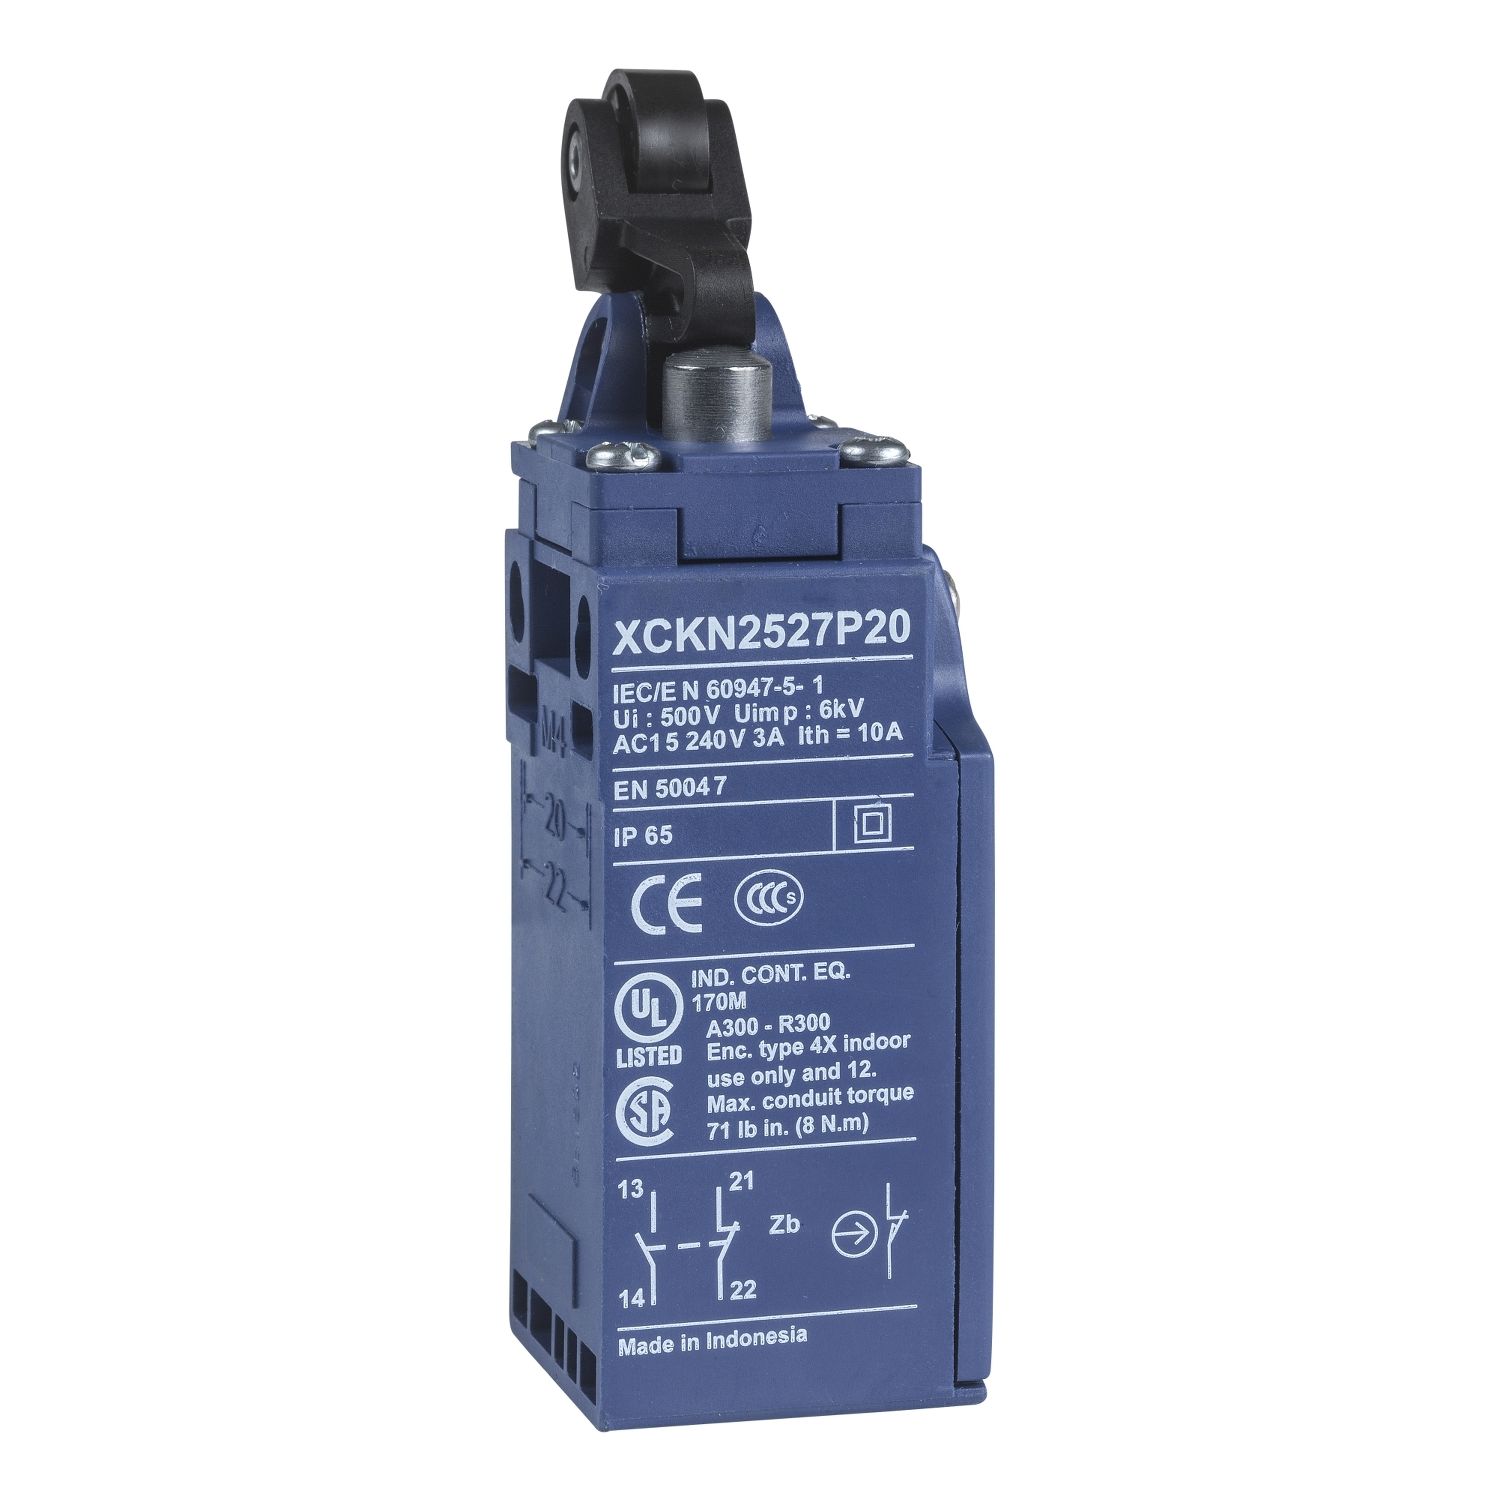 XCKN2127P20 Limit switch, Limit switches XC Standard, XCKN, thermoplastic plastic roller lever plung. Ver, 1NC+1 NO, snap, M20